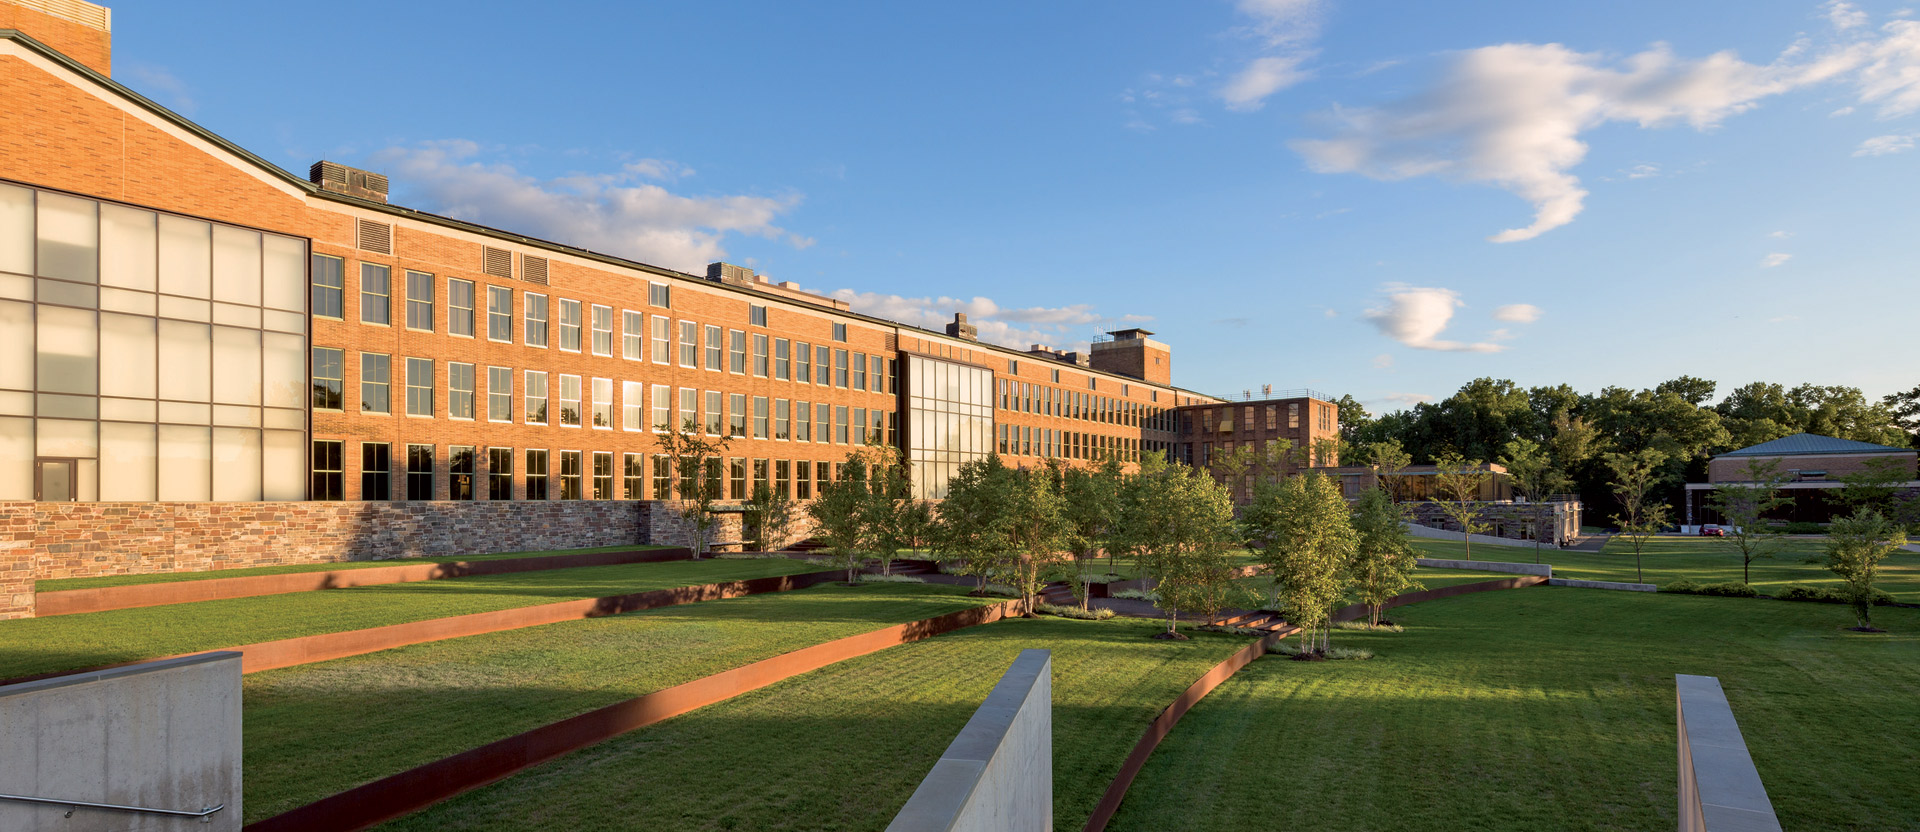 Modern educational facility with a blend of traditional brickwork and contemporary glass facade, landscaped with green lawns, geometric walkways, and young trees, under a clear blue sky.